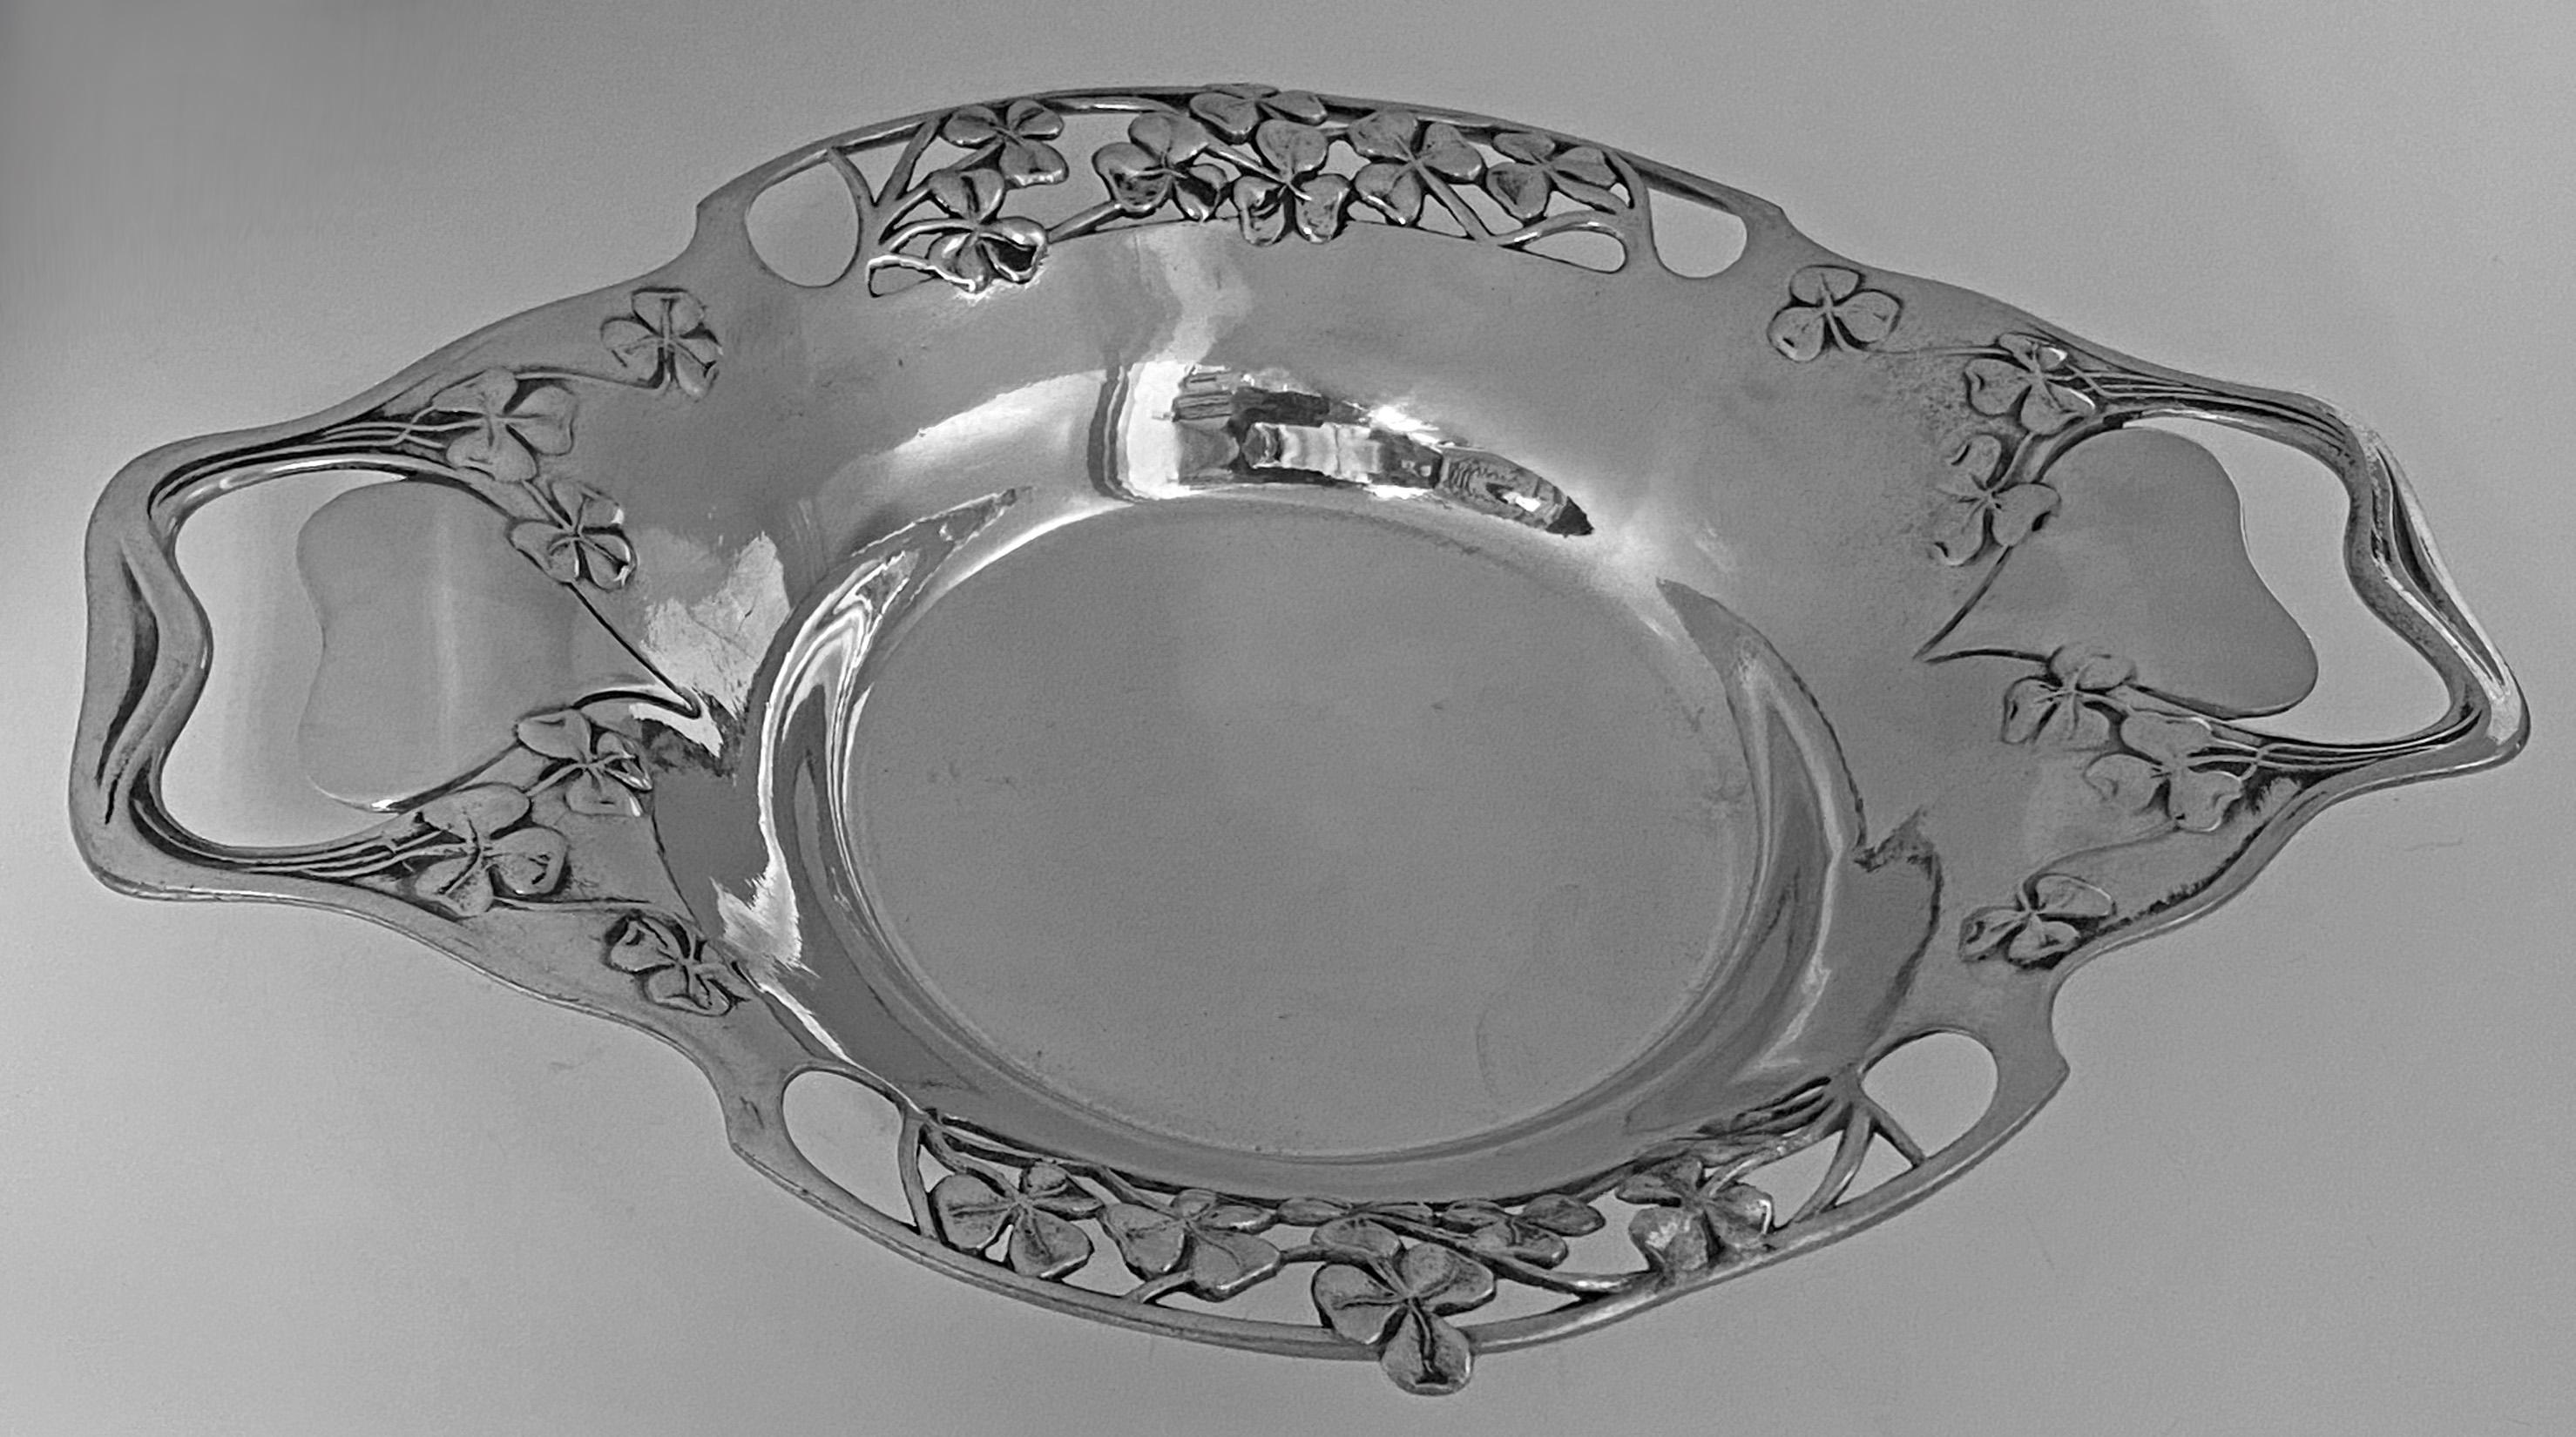 A Liberty Tudric Pewter Dish, Liberty & Co, English, circa 1903. The two handled dish with stylized cut out handles in a heart shape with a pierced surround of shamrocks, welled interior. Stamped Made in England 0287 Solkets mark on underside.